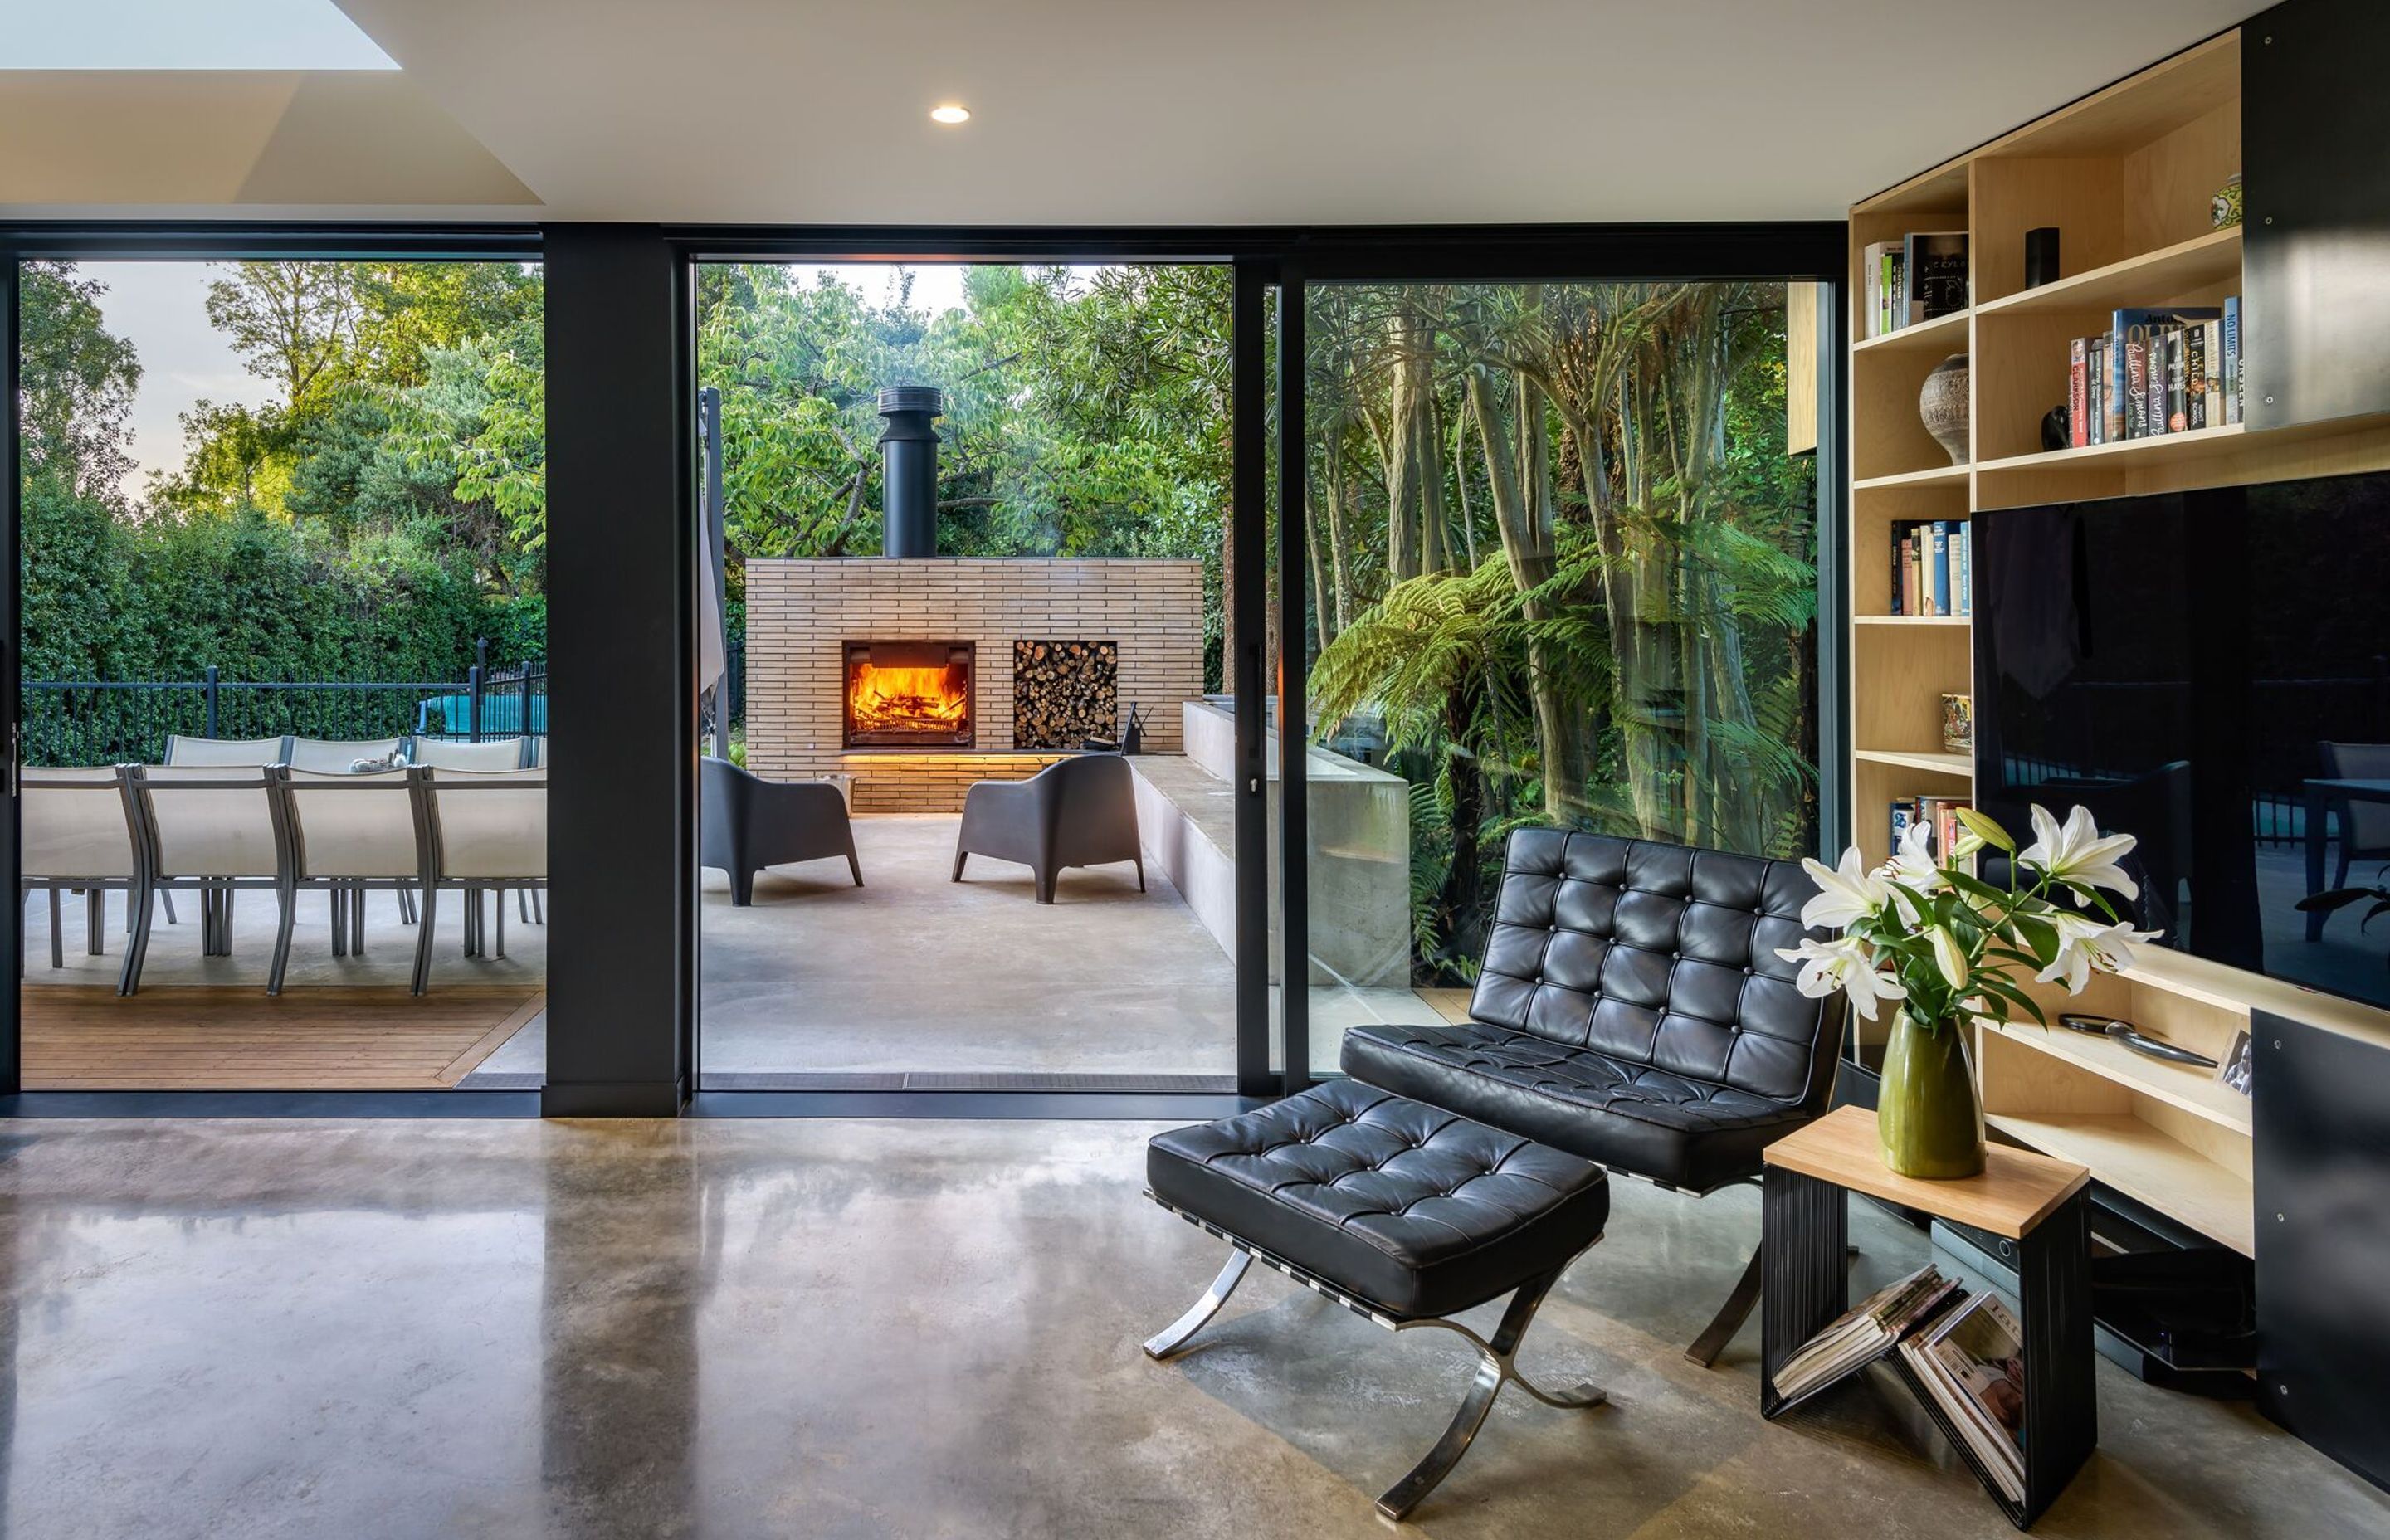 Facing north, the lounge flows out into a stunning outdoor room with a built-in fireplace/pizza oven and in-situ concrete seating.